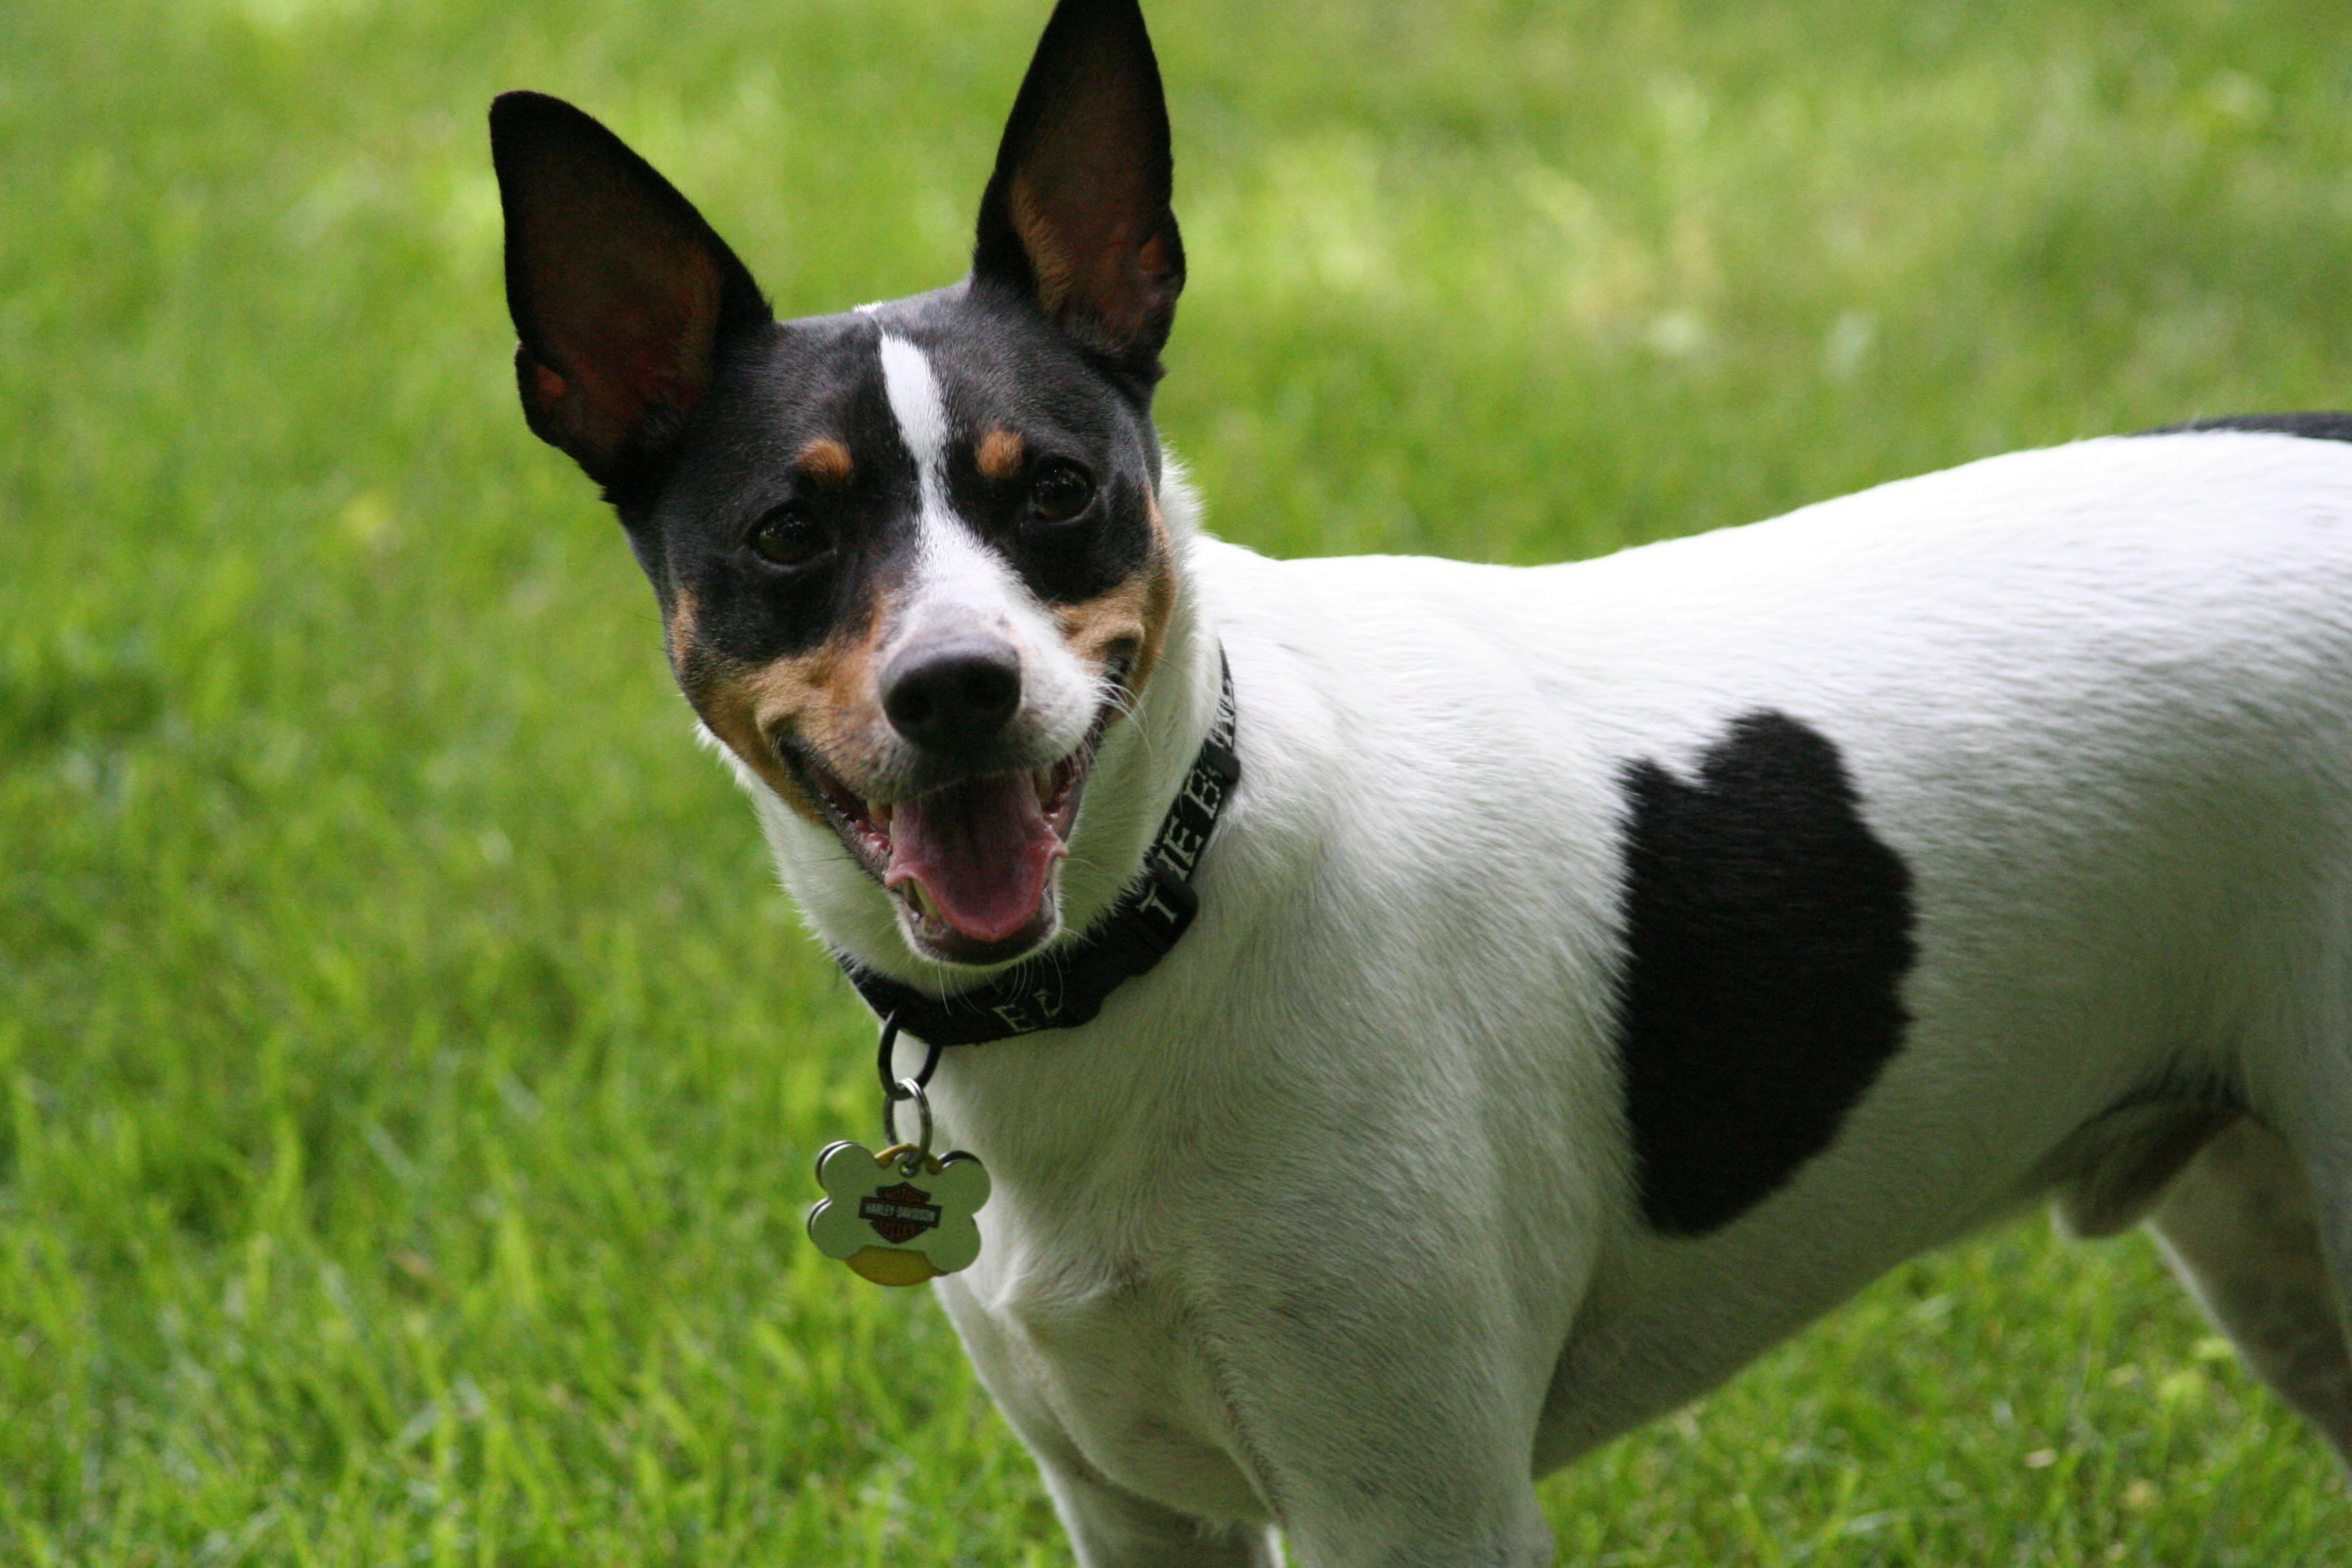 Decker Rat Terrier Dog: Decker Decker Rat Terrier About The Breed 